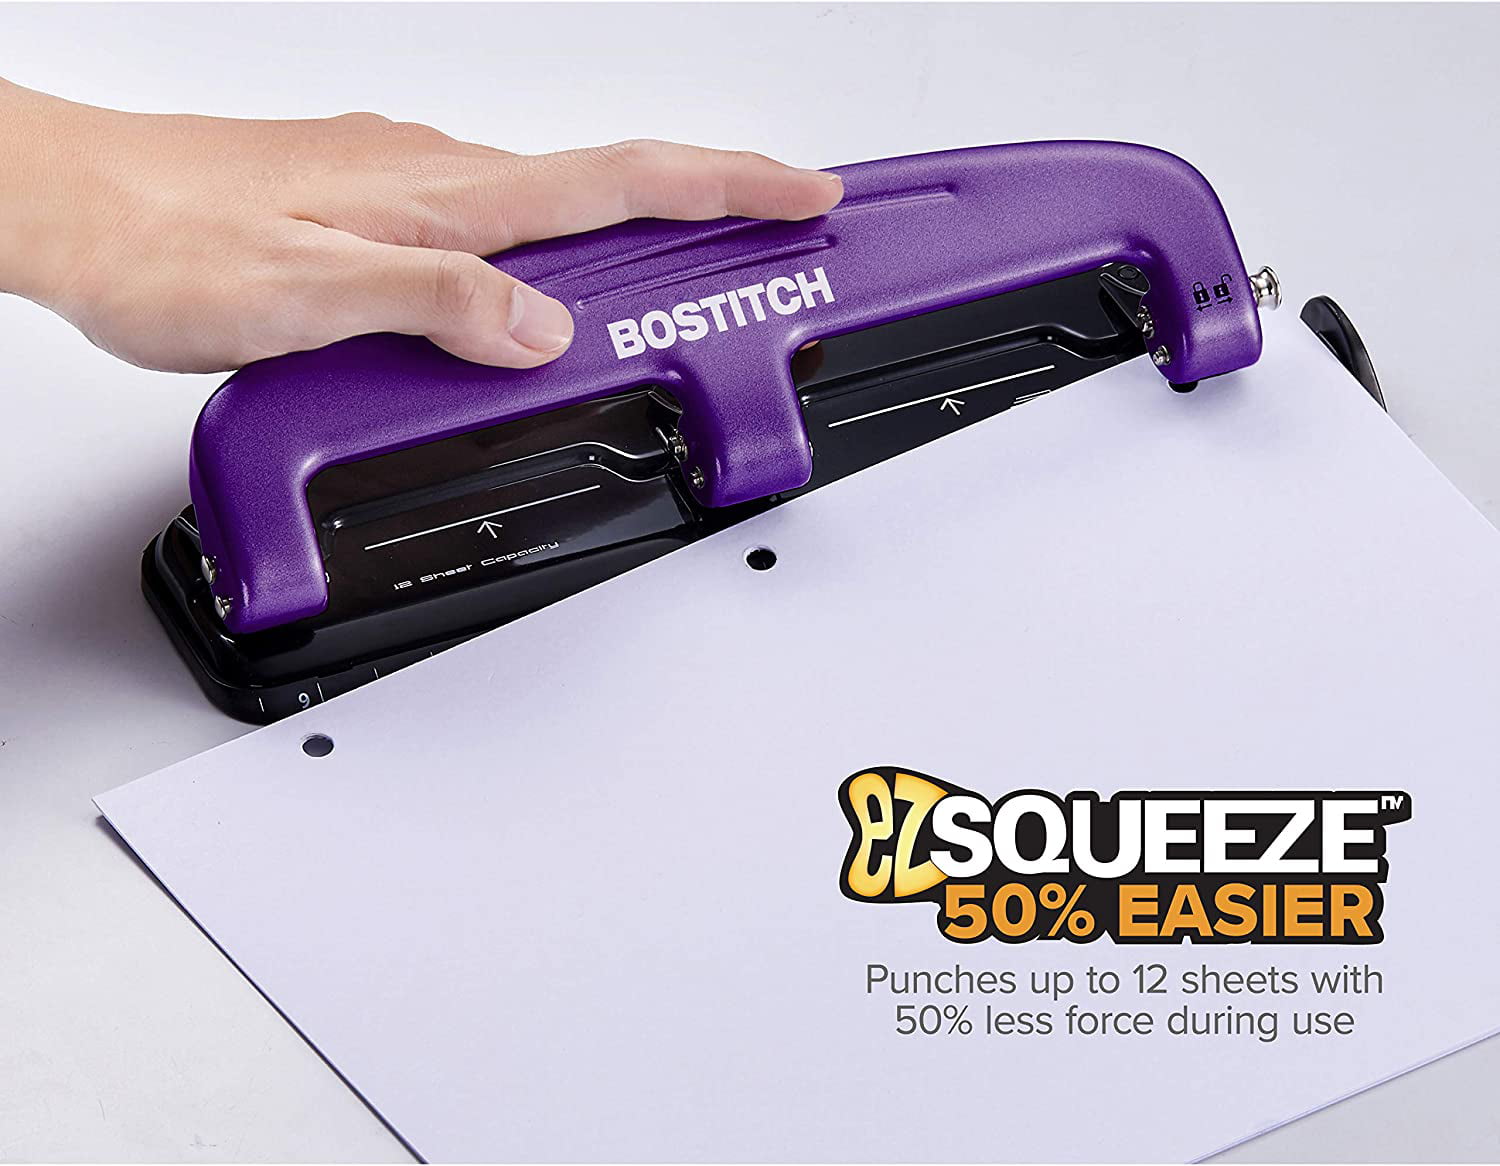 12 Sheets EZ Squeeze Reduced Effort 3-Hole Punch New Purple